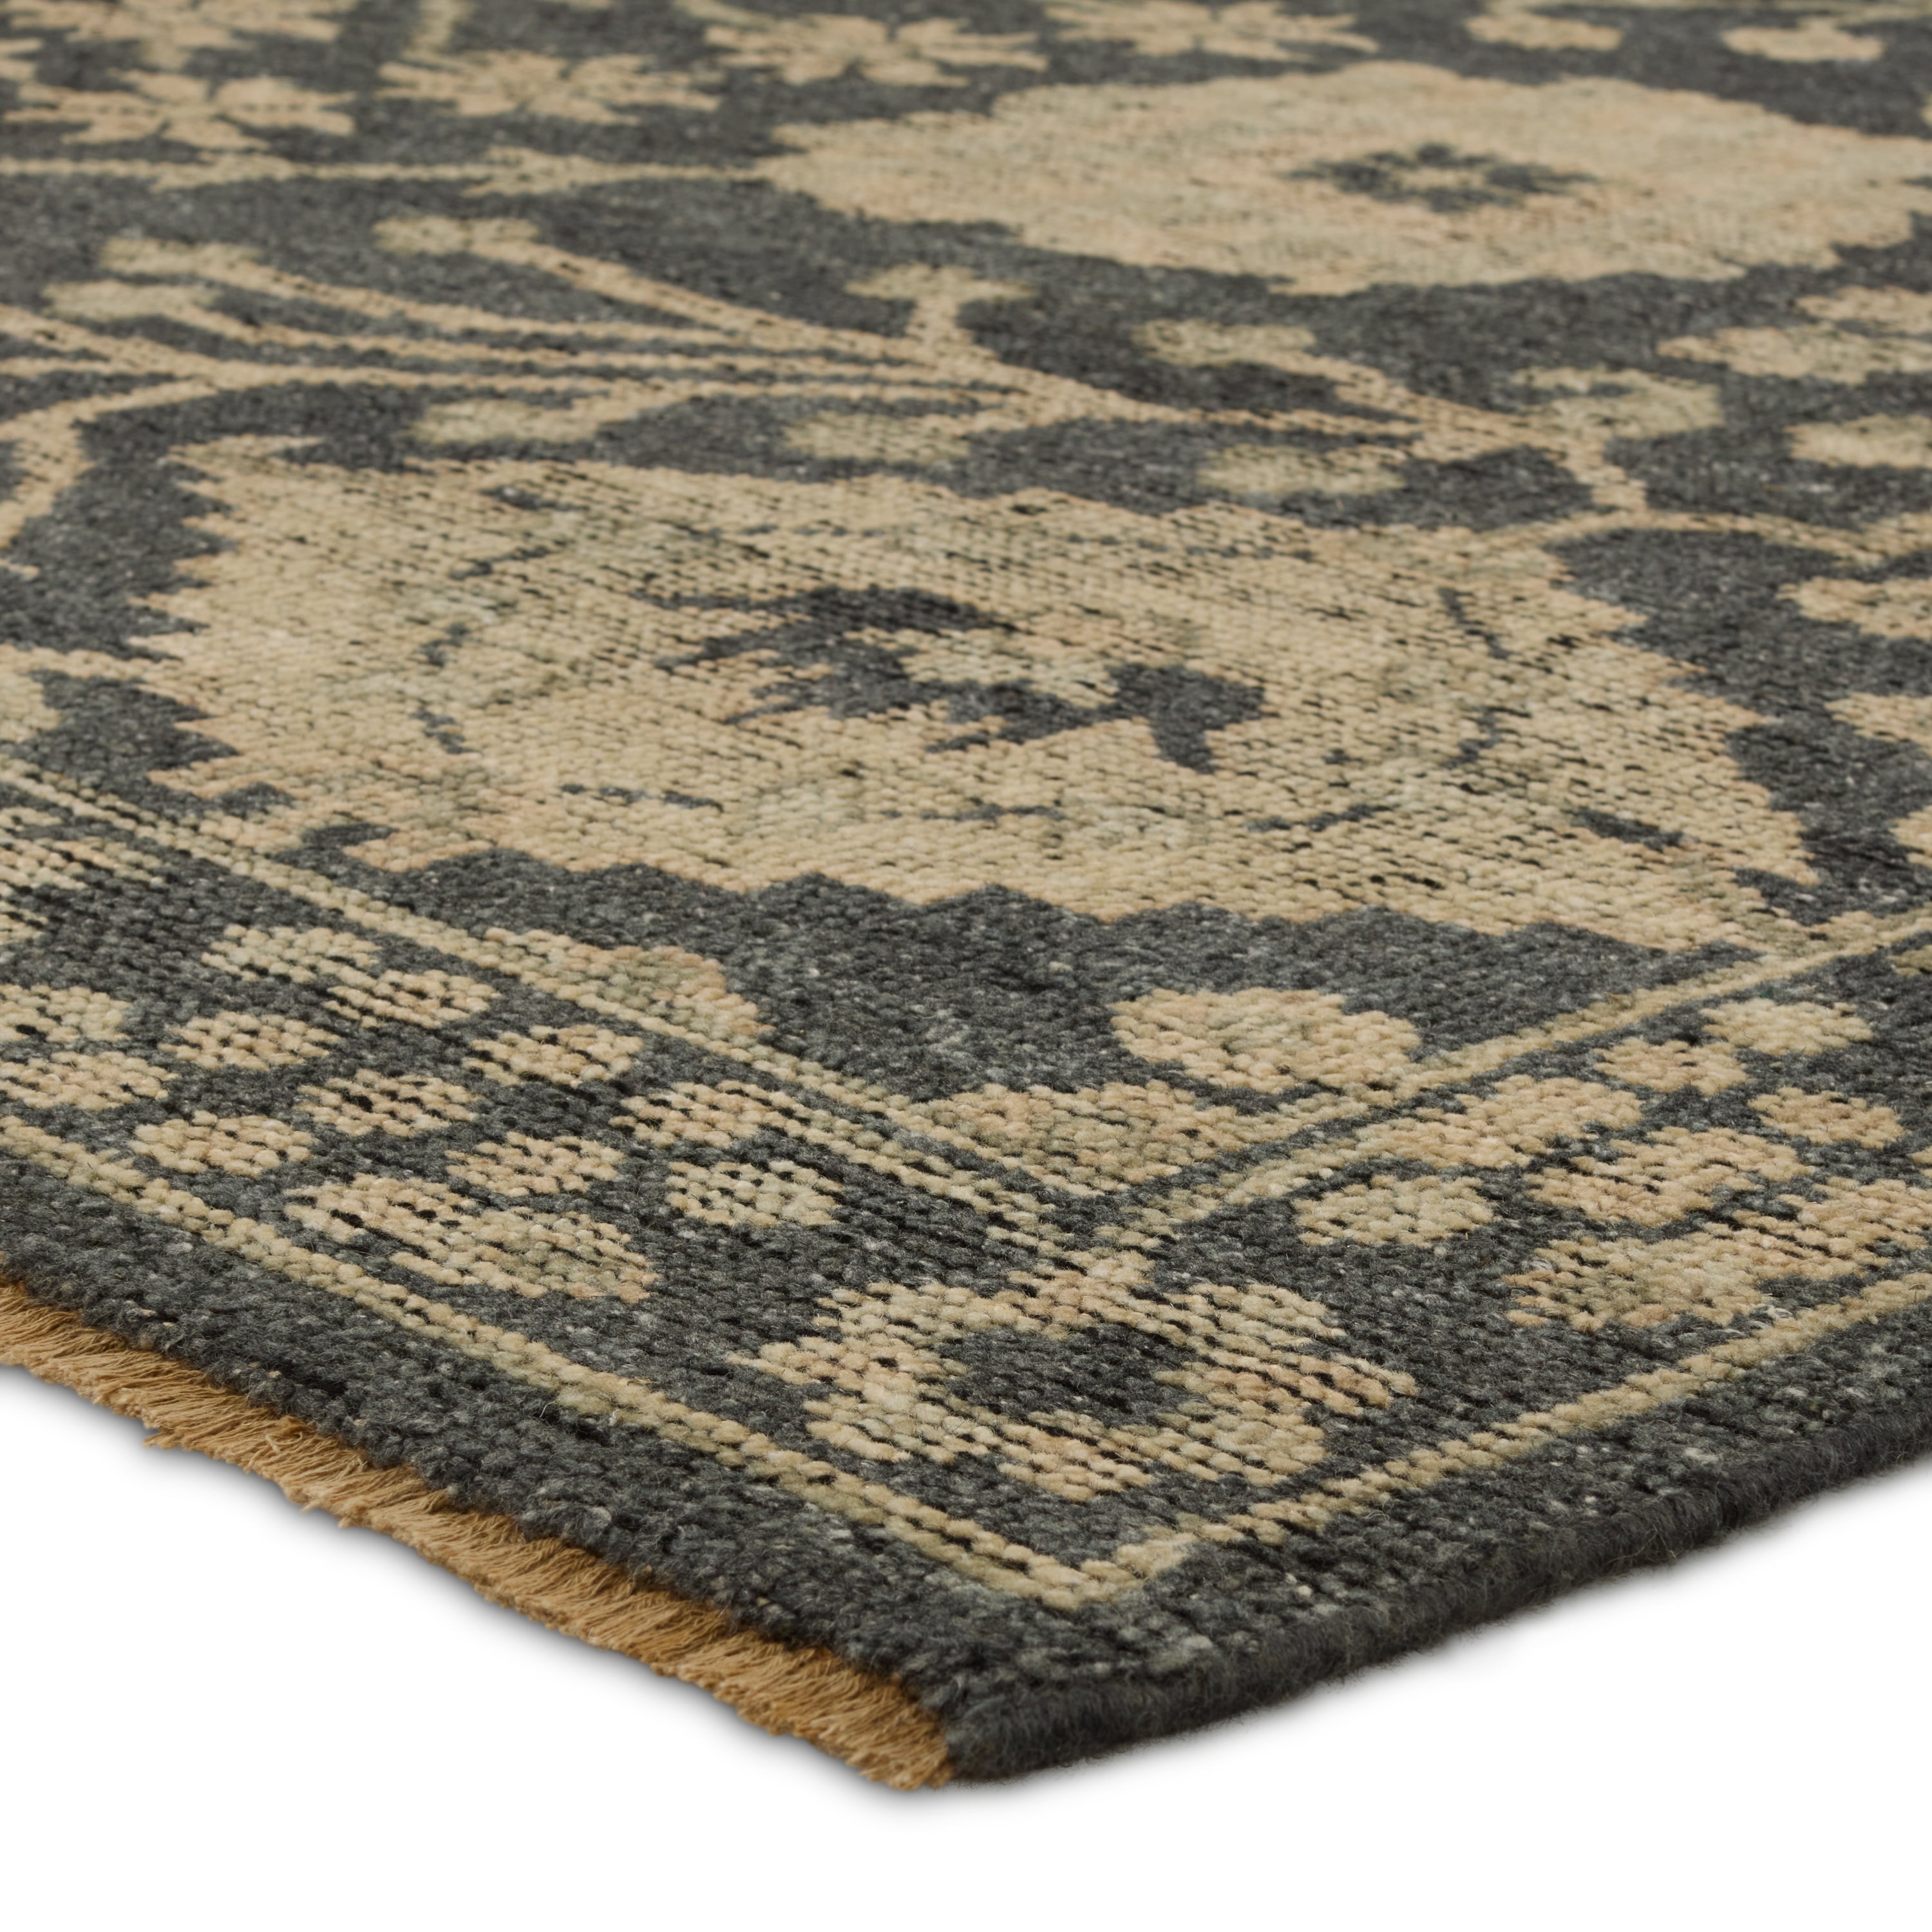 The Rhapsody collection features heirloom-quality designs of stunningly abrashed Old World patterns. The Maeli area rug boasts a beautifully washed Oushak motif with a decorative border. The dark gray tones are accented with khaki, cream, green, and beige hues for added depth and intrigue. This durable wool handknot anchors living spaces with a fresh take on vintage style. Amethyst Home provides interior design, new construction, custom furniture, and area rugs in the Des Moines metro area.